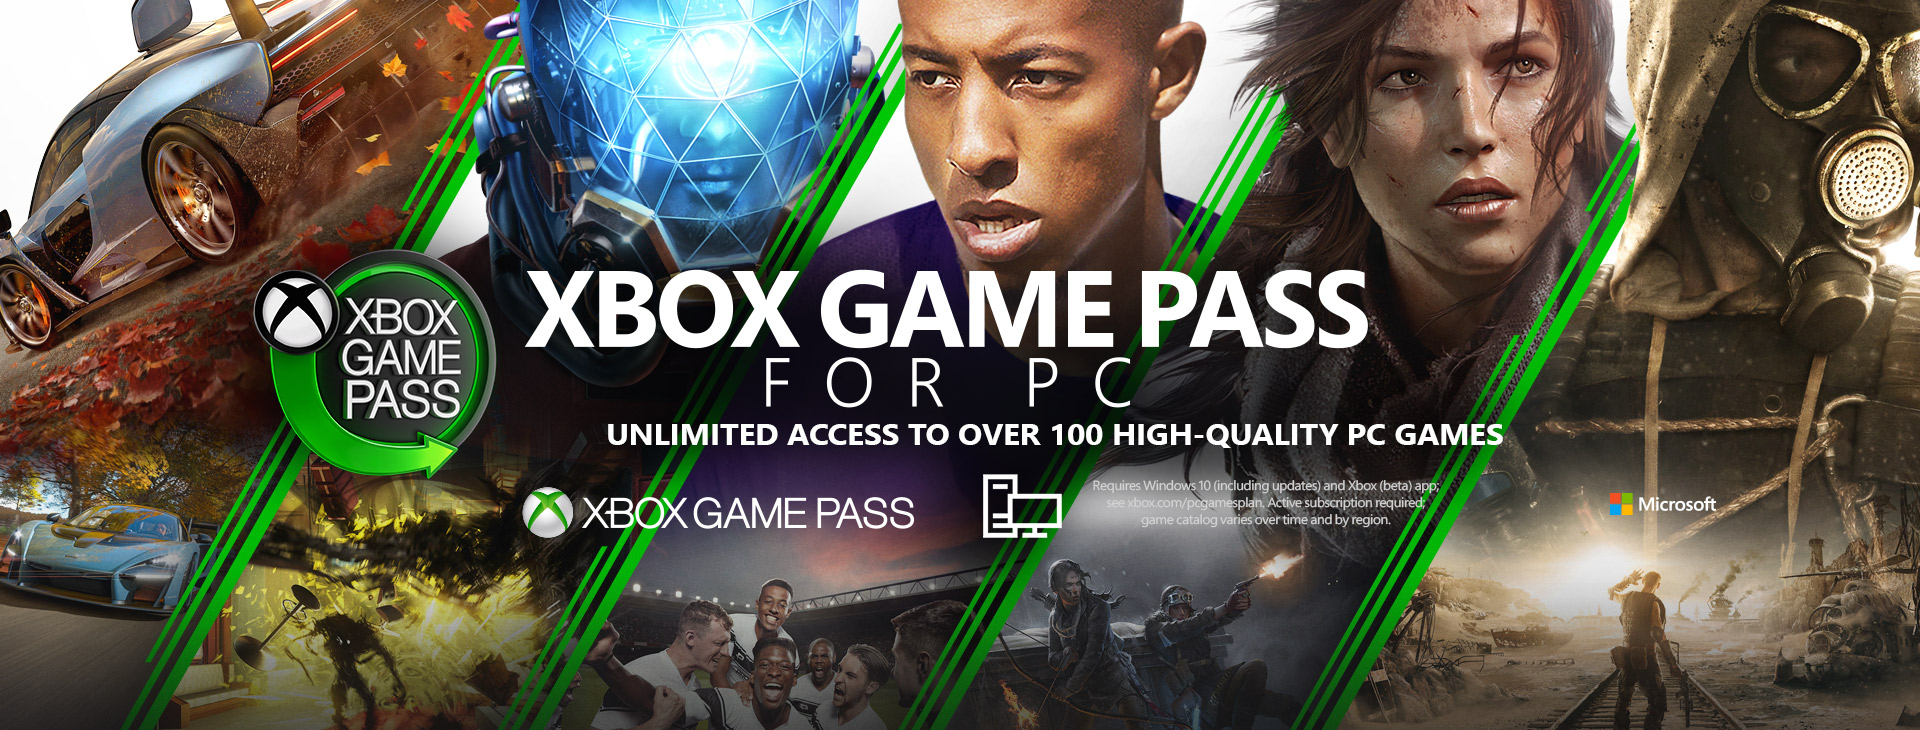 xbox for pc game pass